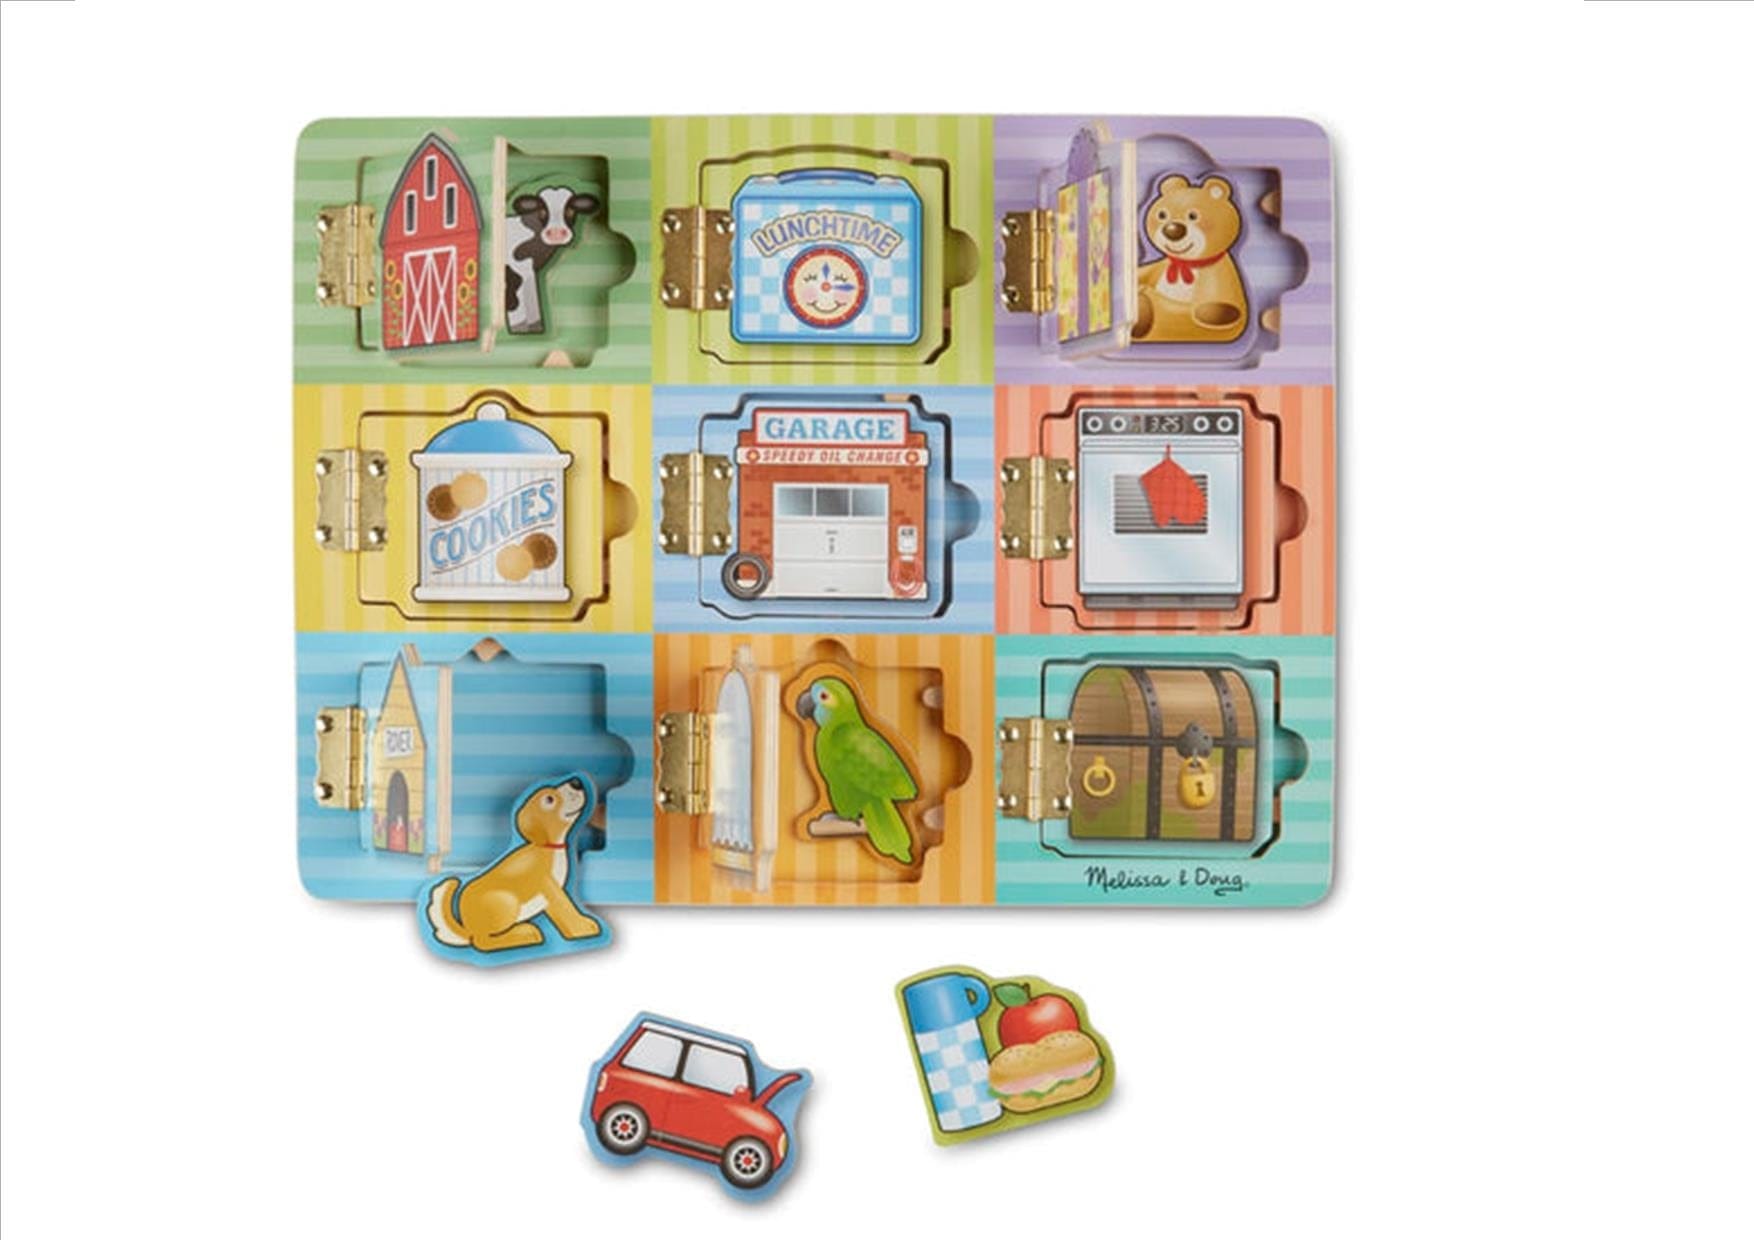 MELISSA & DOUG Magnetic Hide & Seek Board: When opened, a colorful magnetic piece is revealed. Move the pieces behind different doors for guessing fun - M&D-474